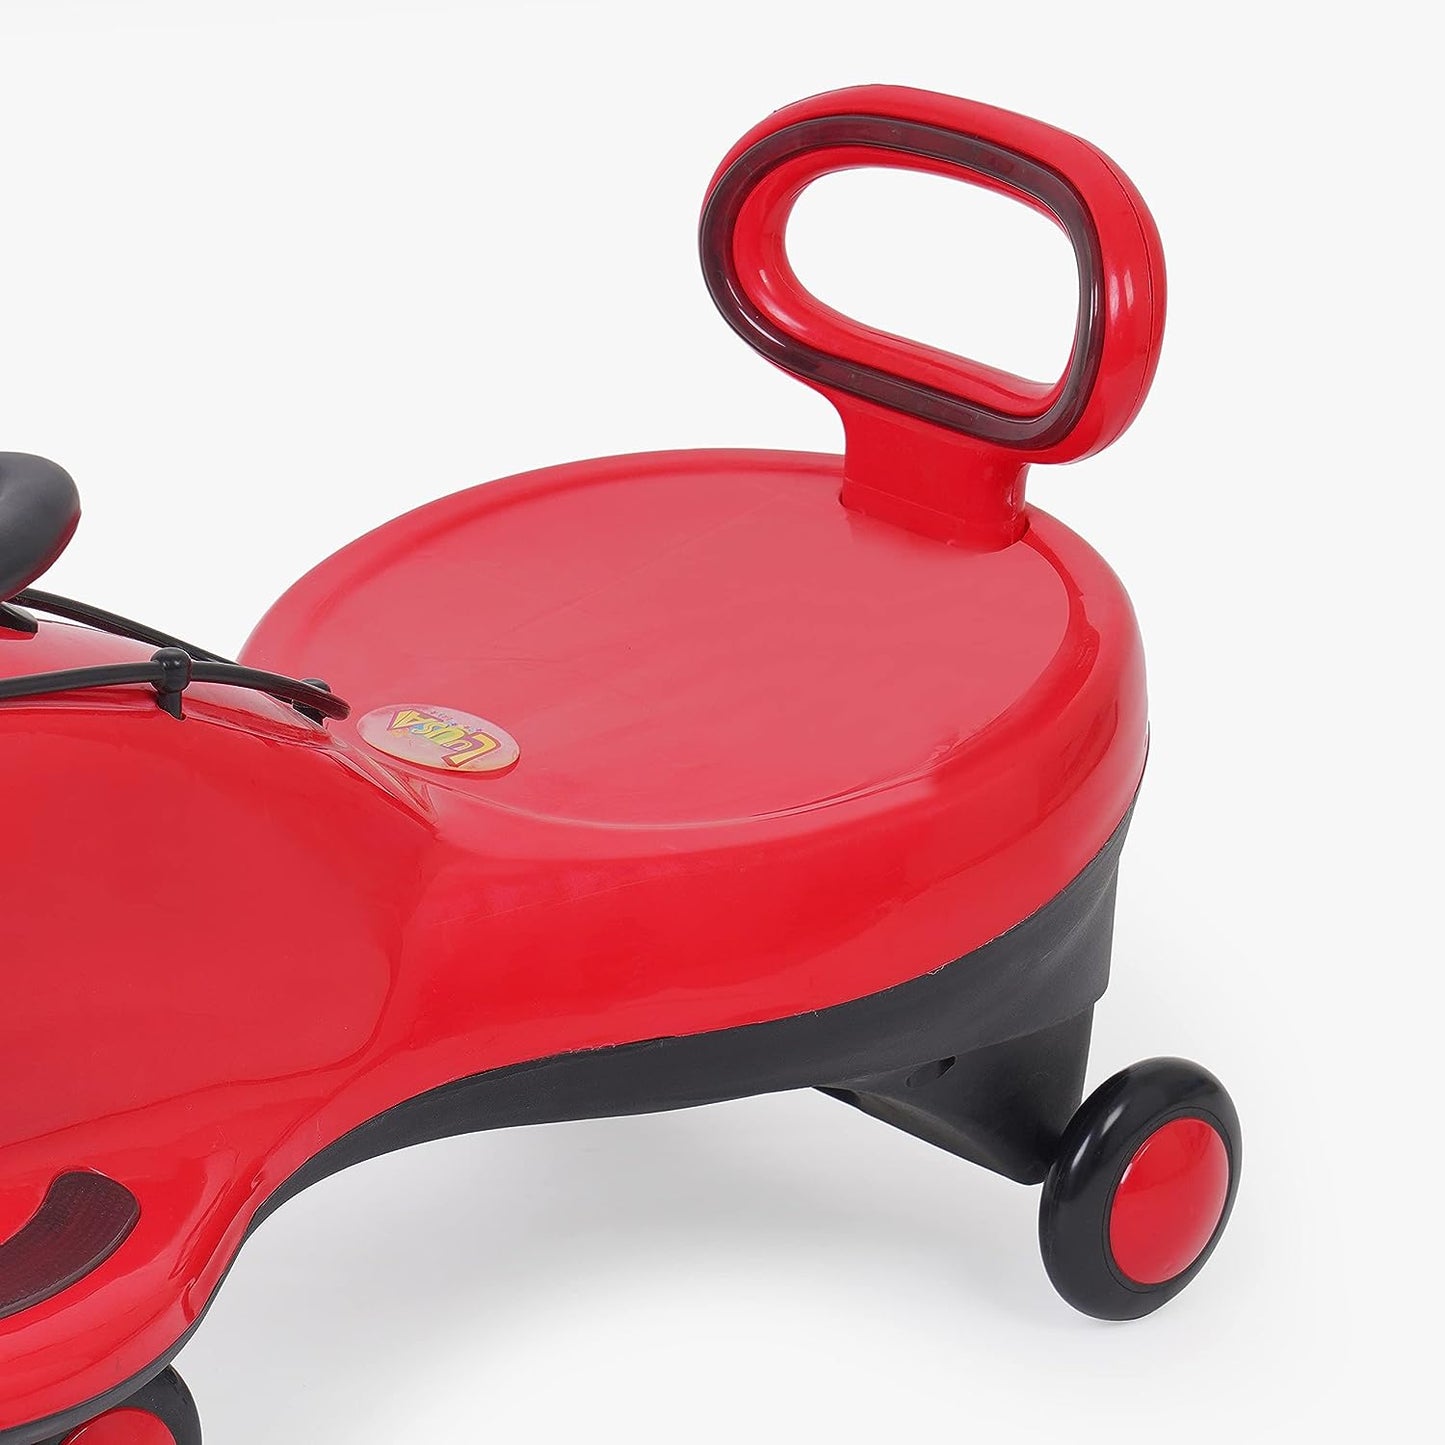 Luusa Train Cooper Magic Car: The Ultimate Ride-On Toy for Kids Aged 2-8 Years with Music and Lights